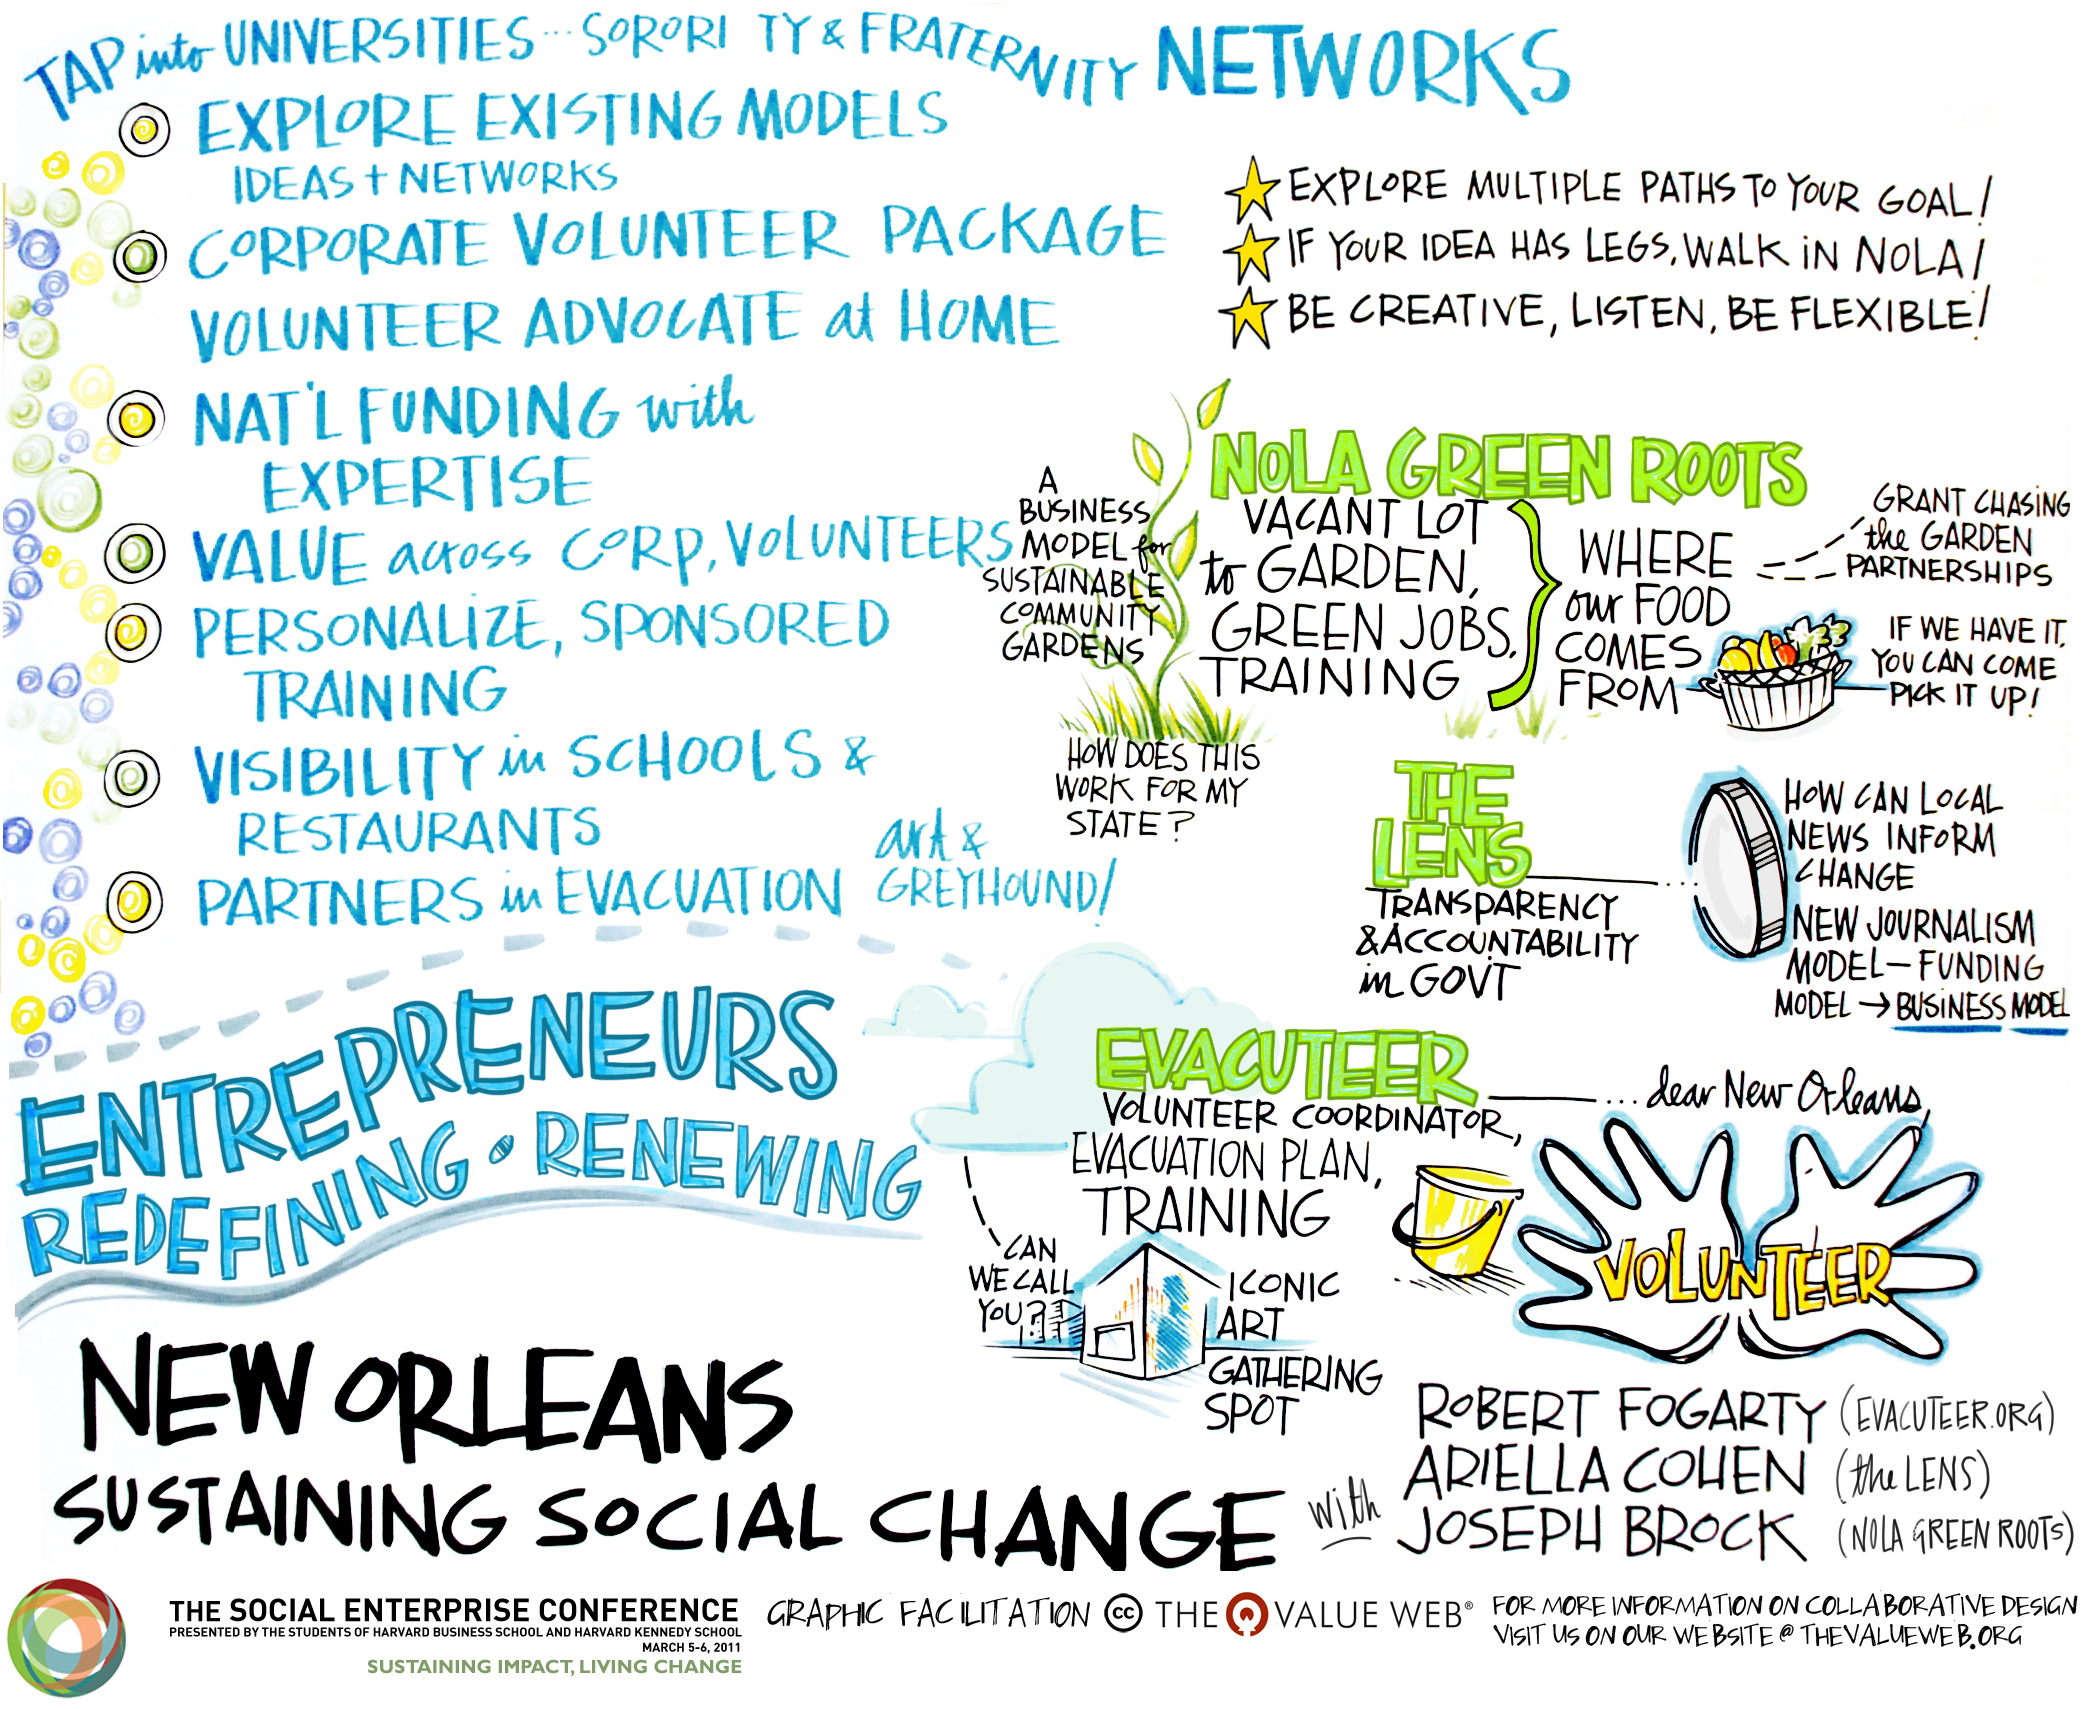 New Orleans: Sustaining Social Change